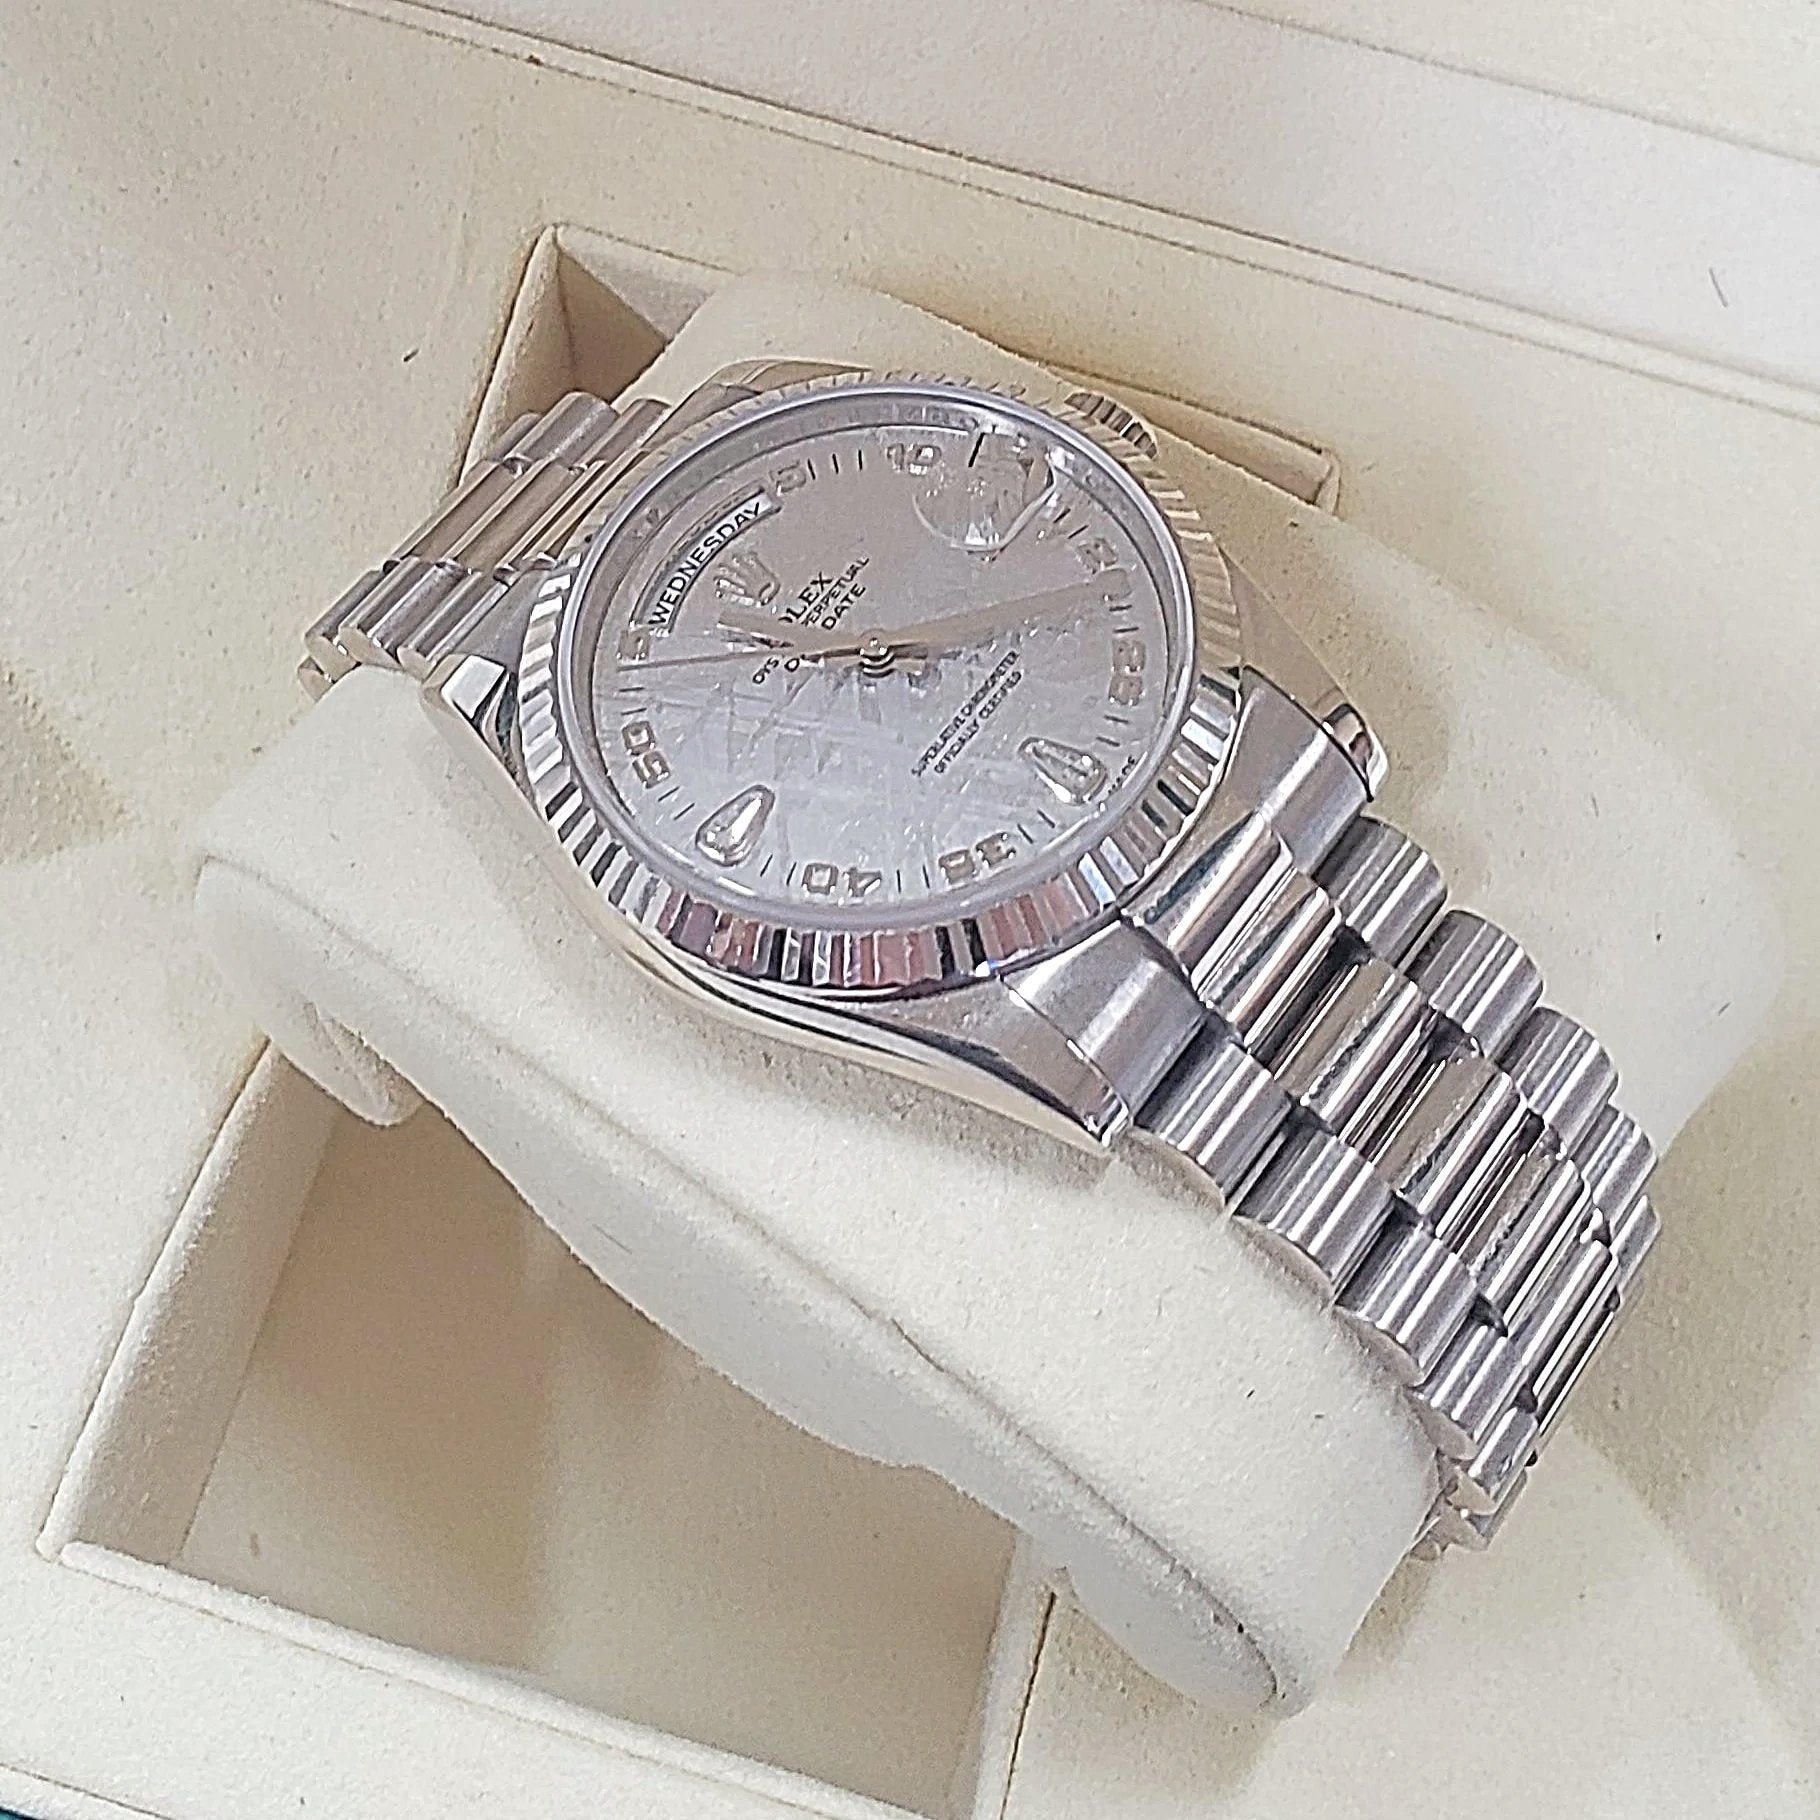 Men's Rolex 36mm Presidential 18K White Gold Watch with Diamond Meteorite Dial and Fluted Bezel. (Pre-Owned)